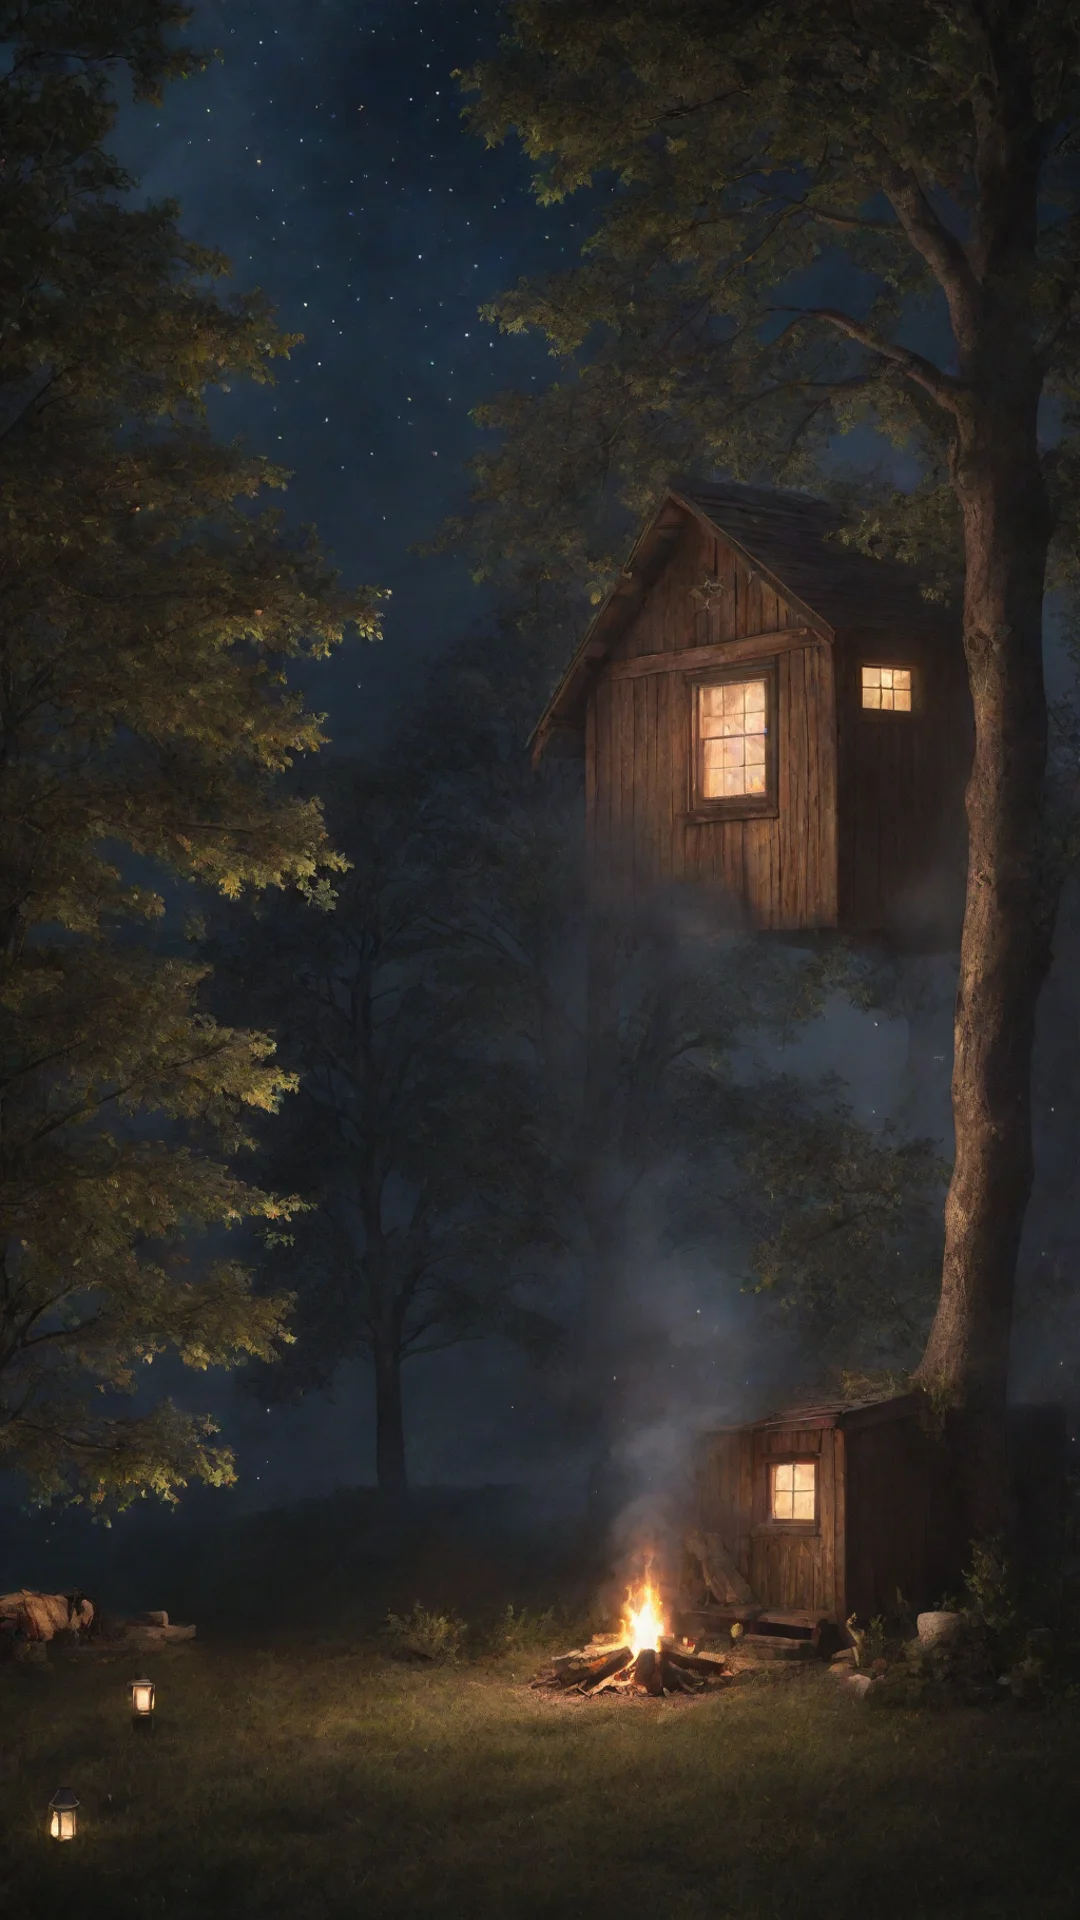 ainight time shed with stars and trees with a warm glow from the windows and a smoking fire. magical and hyper realistic tall